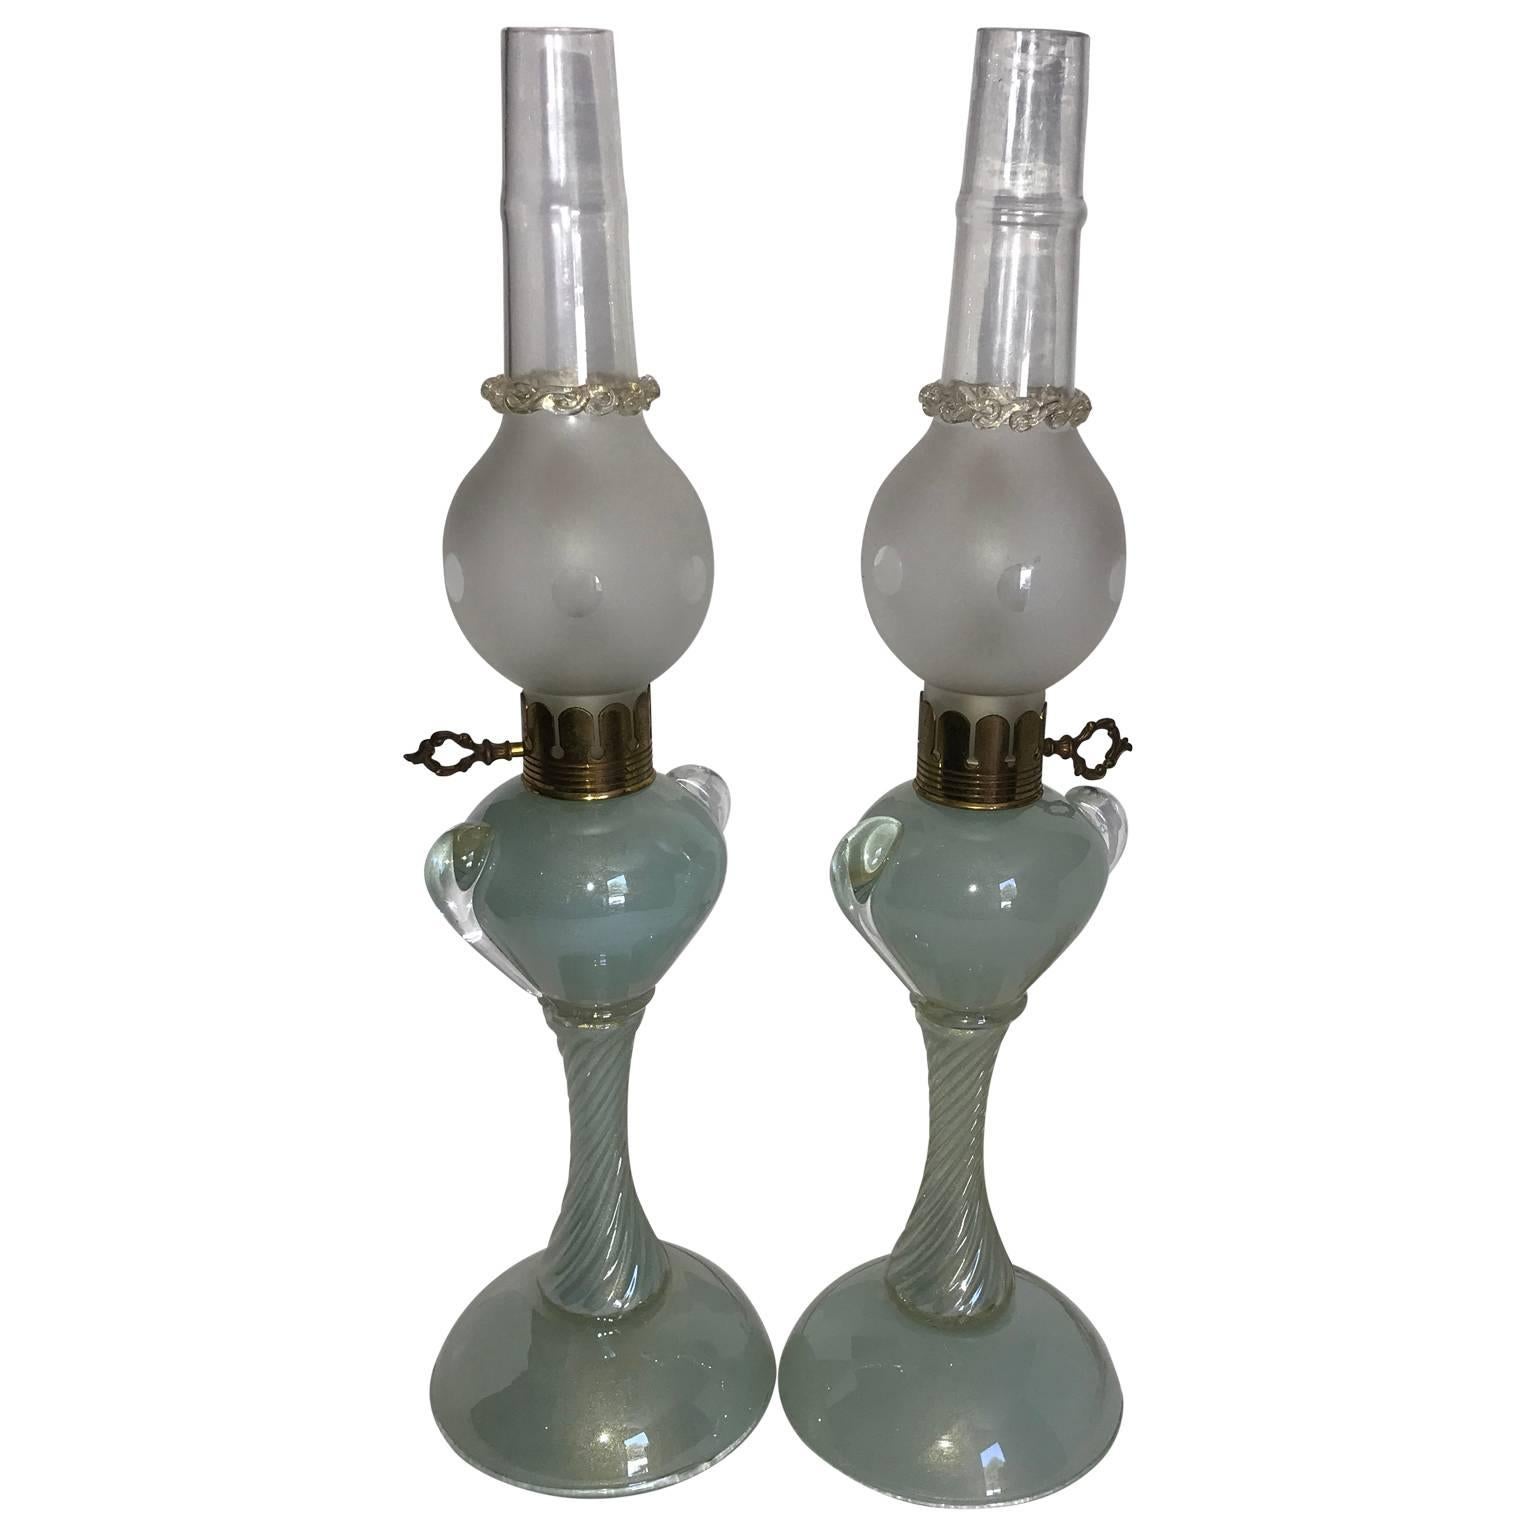 Italian pair of lamps in a luster turquoise glass and brass hardware with frosted glass shades. Original wire and switch in good working condition. New wiring and switches can be installed at no cost on demand.
       